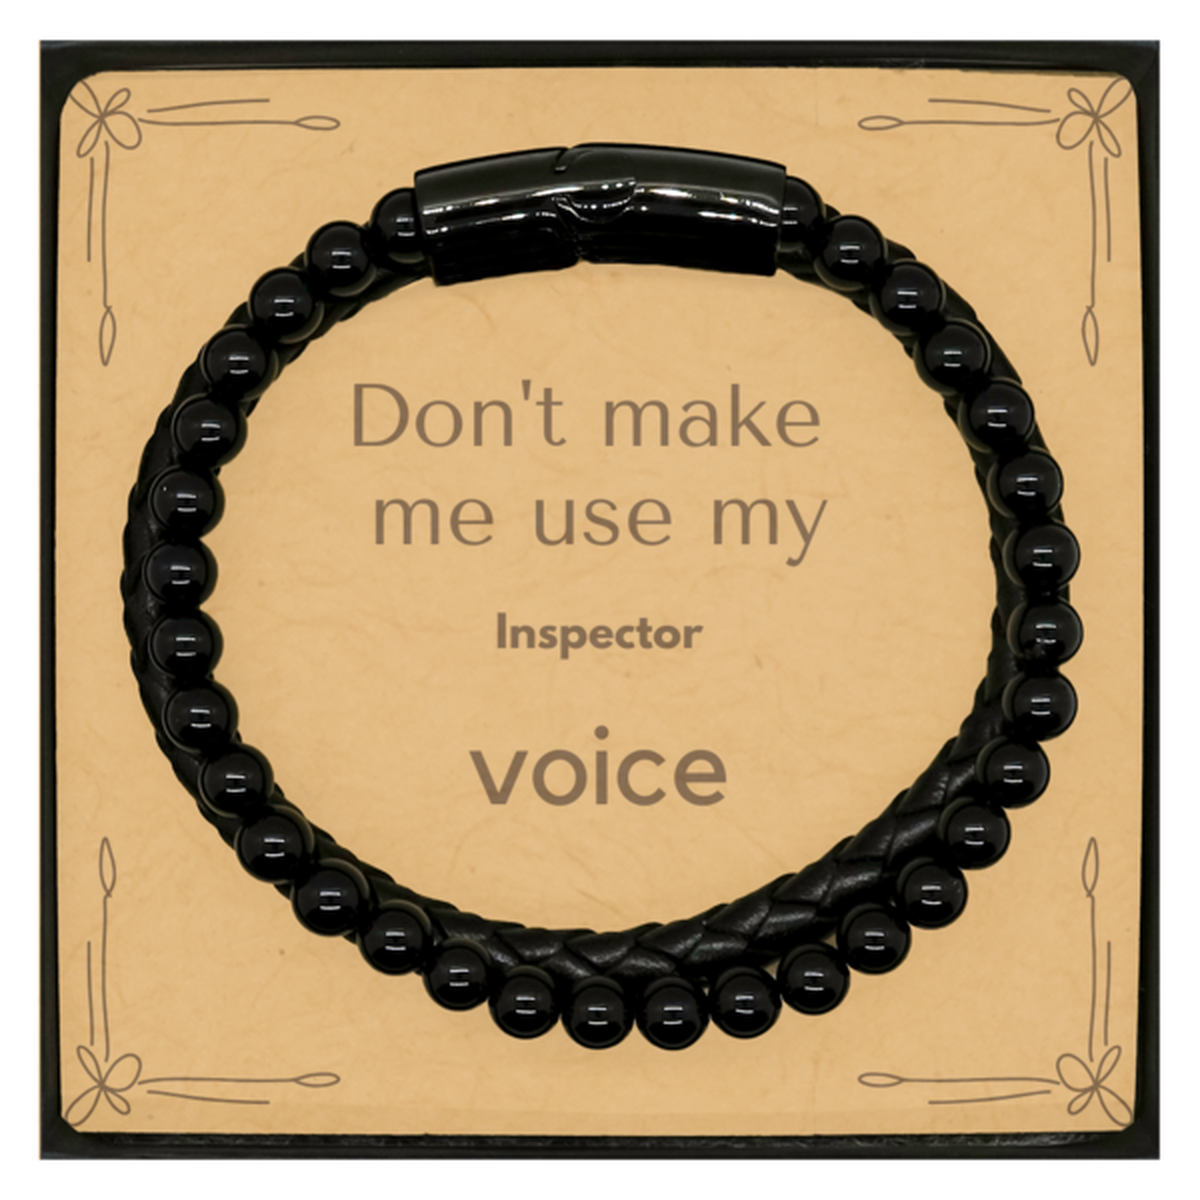 Don't make me use my Inspector voice, Sarcasm Inspector Card Gifts, Christmas Inspector Stone Leather Bracelets Birthday Unique Gifts For Inspector Coworkers, Men, Women, Colleague, Friends